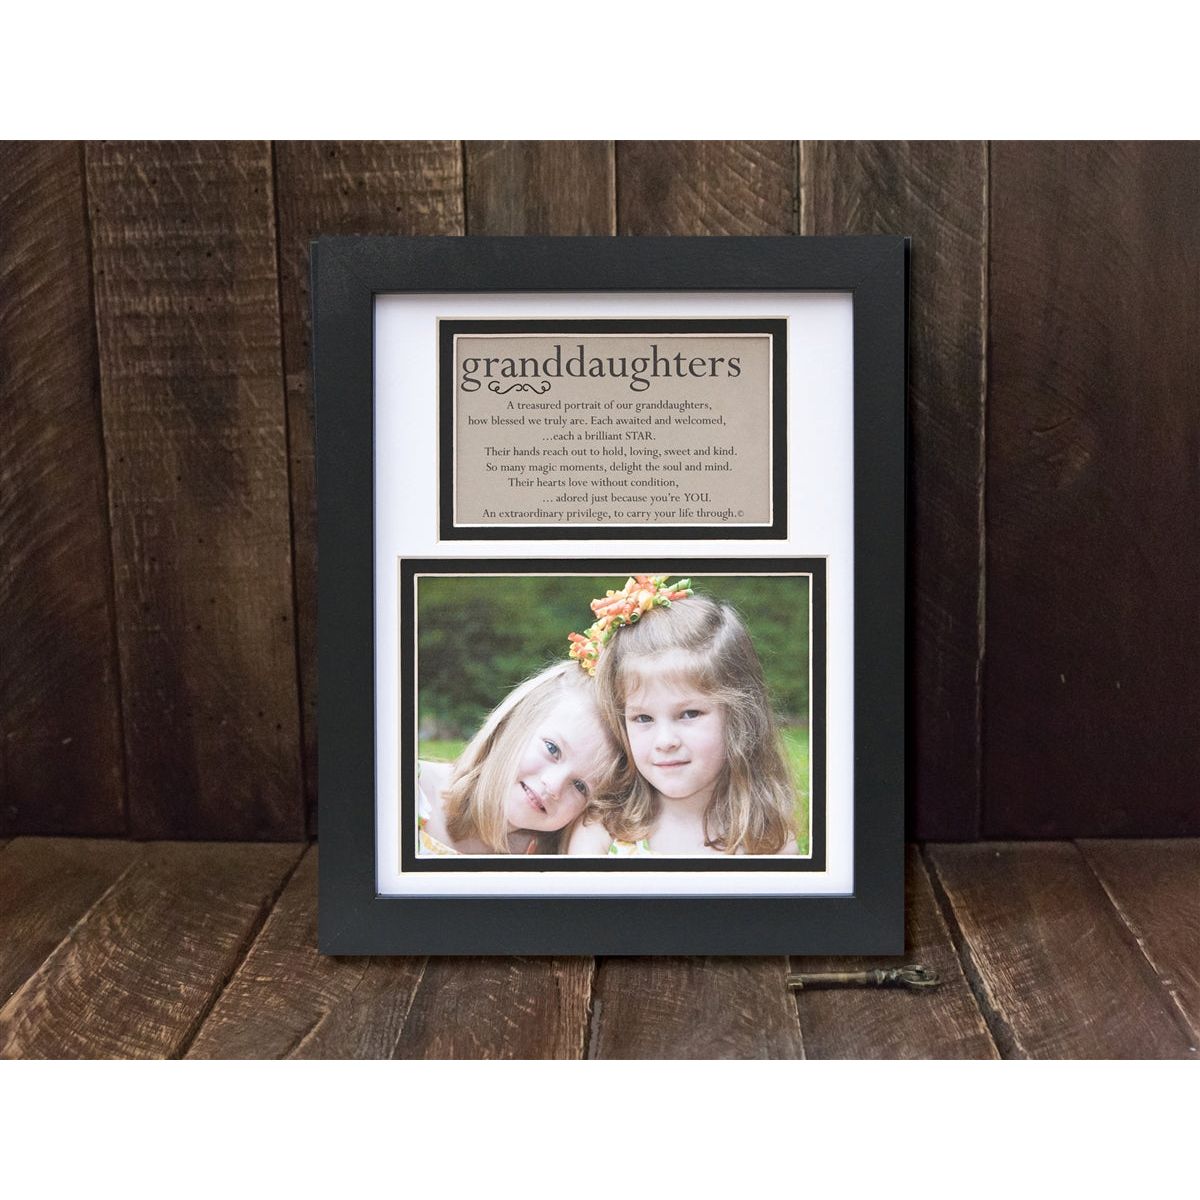 Granddaughters frame and poem with space for a photo.